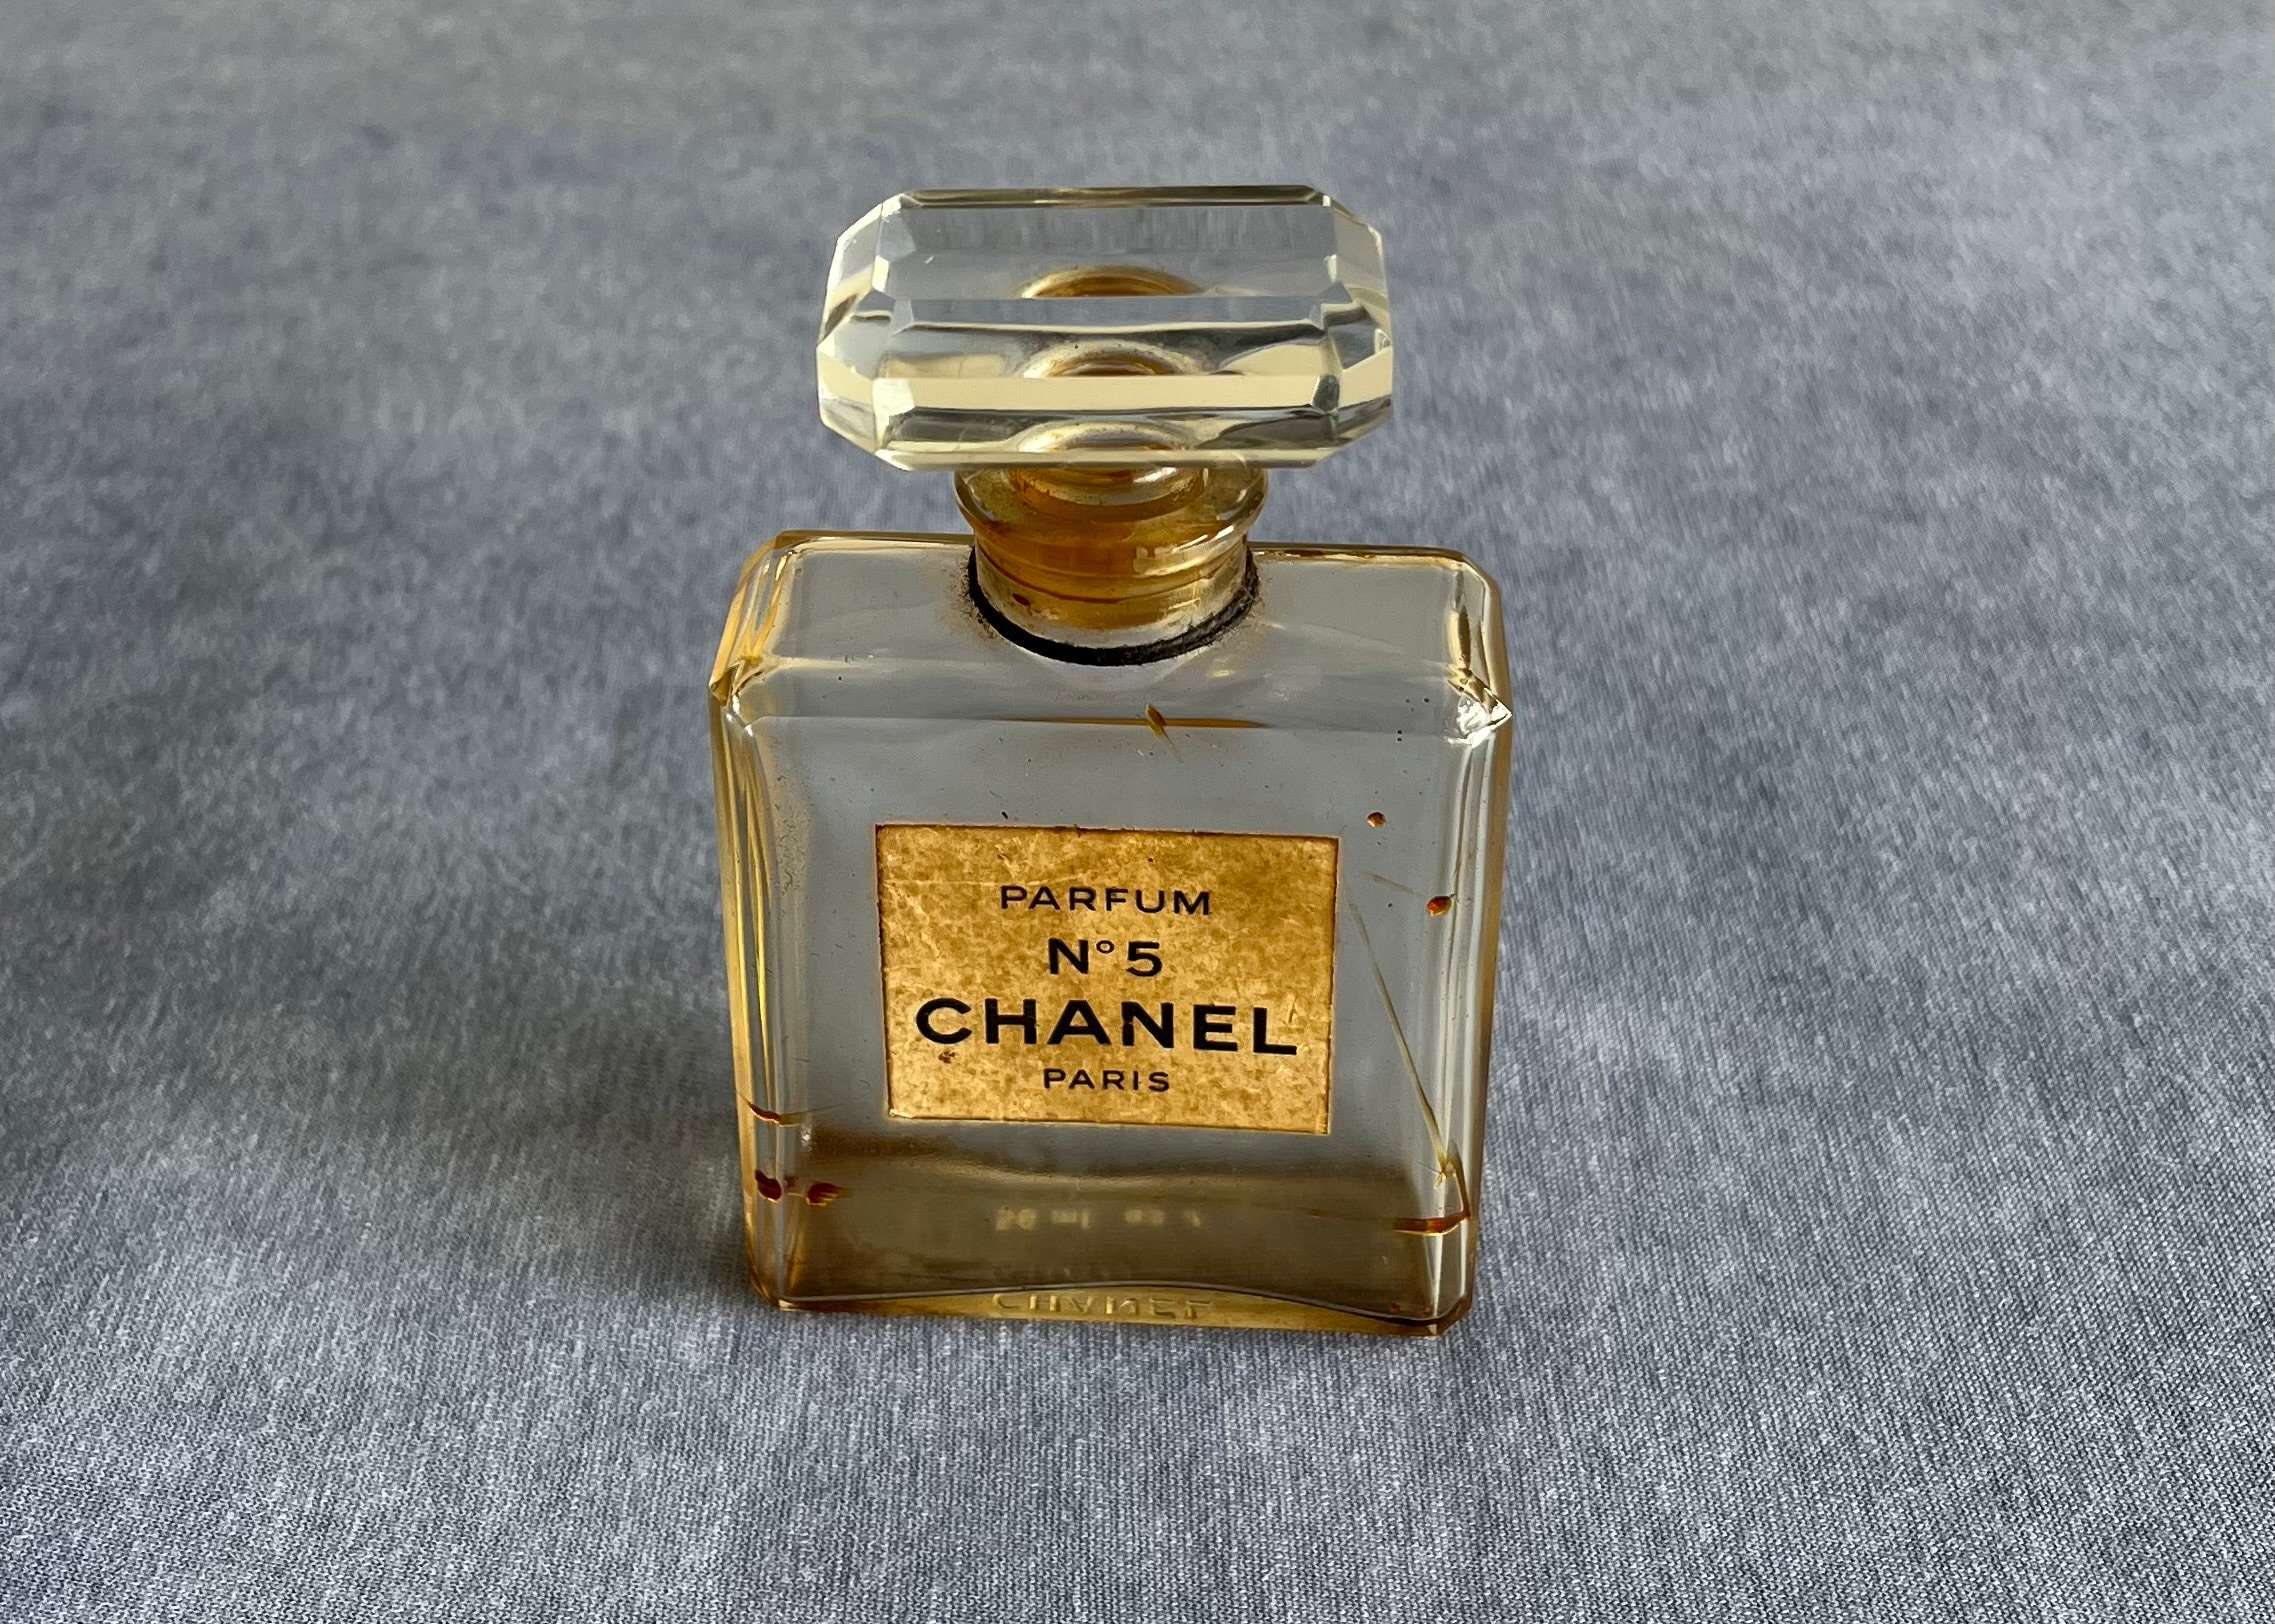 Buy Chanel Perfume Oil Online In India -  India